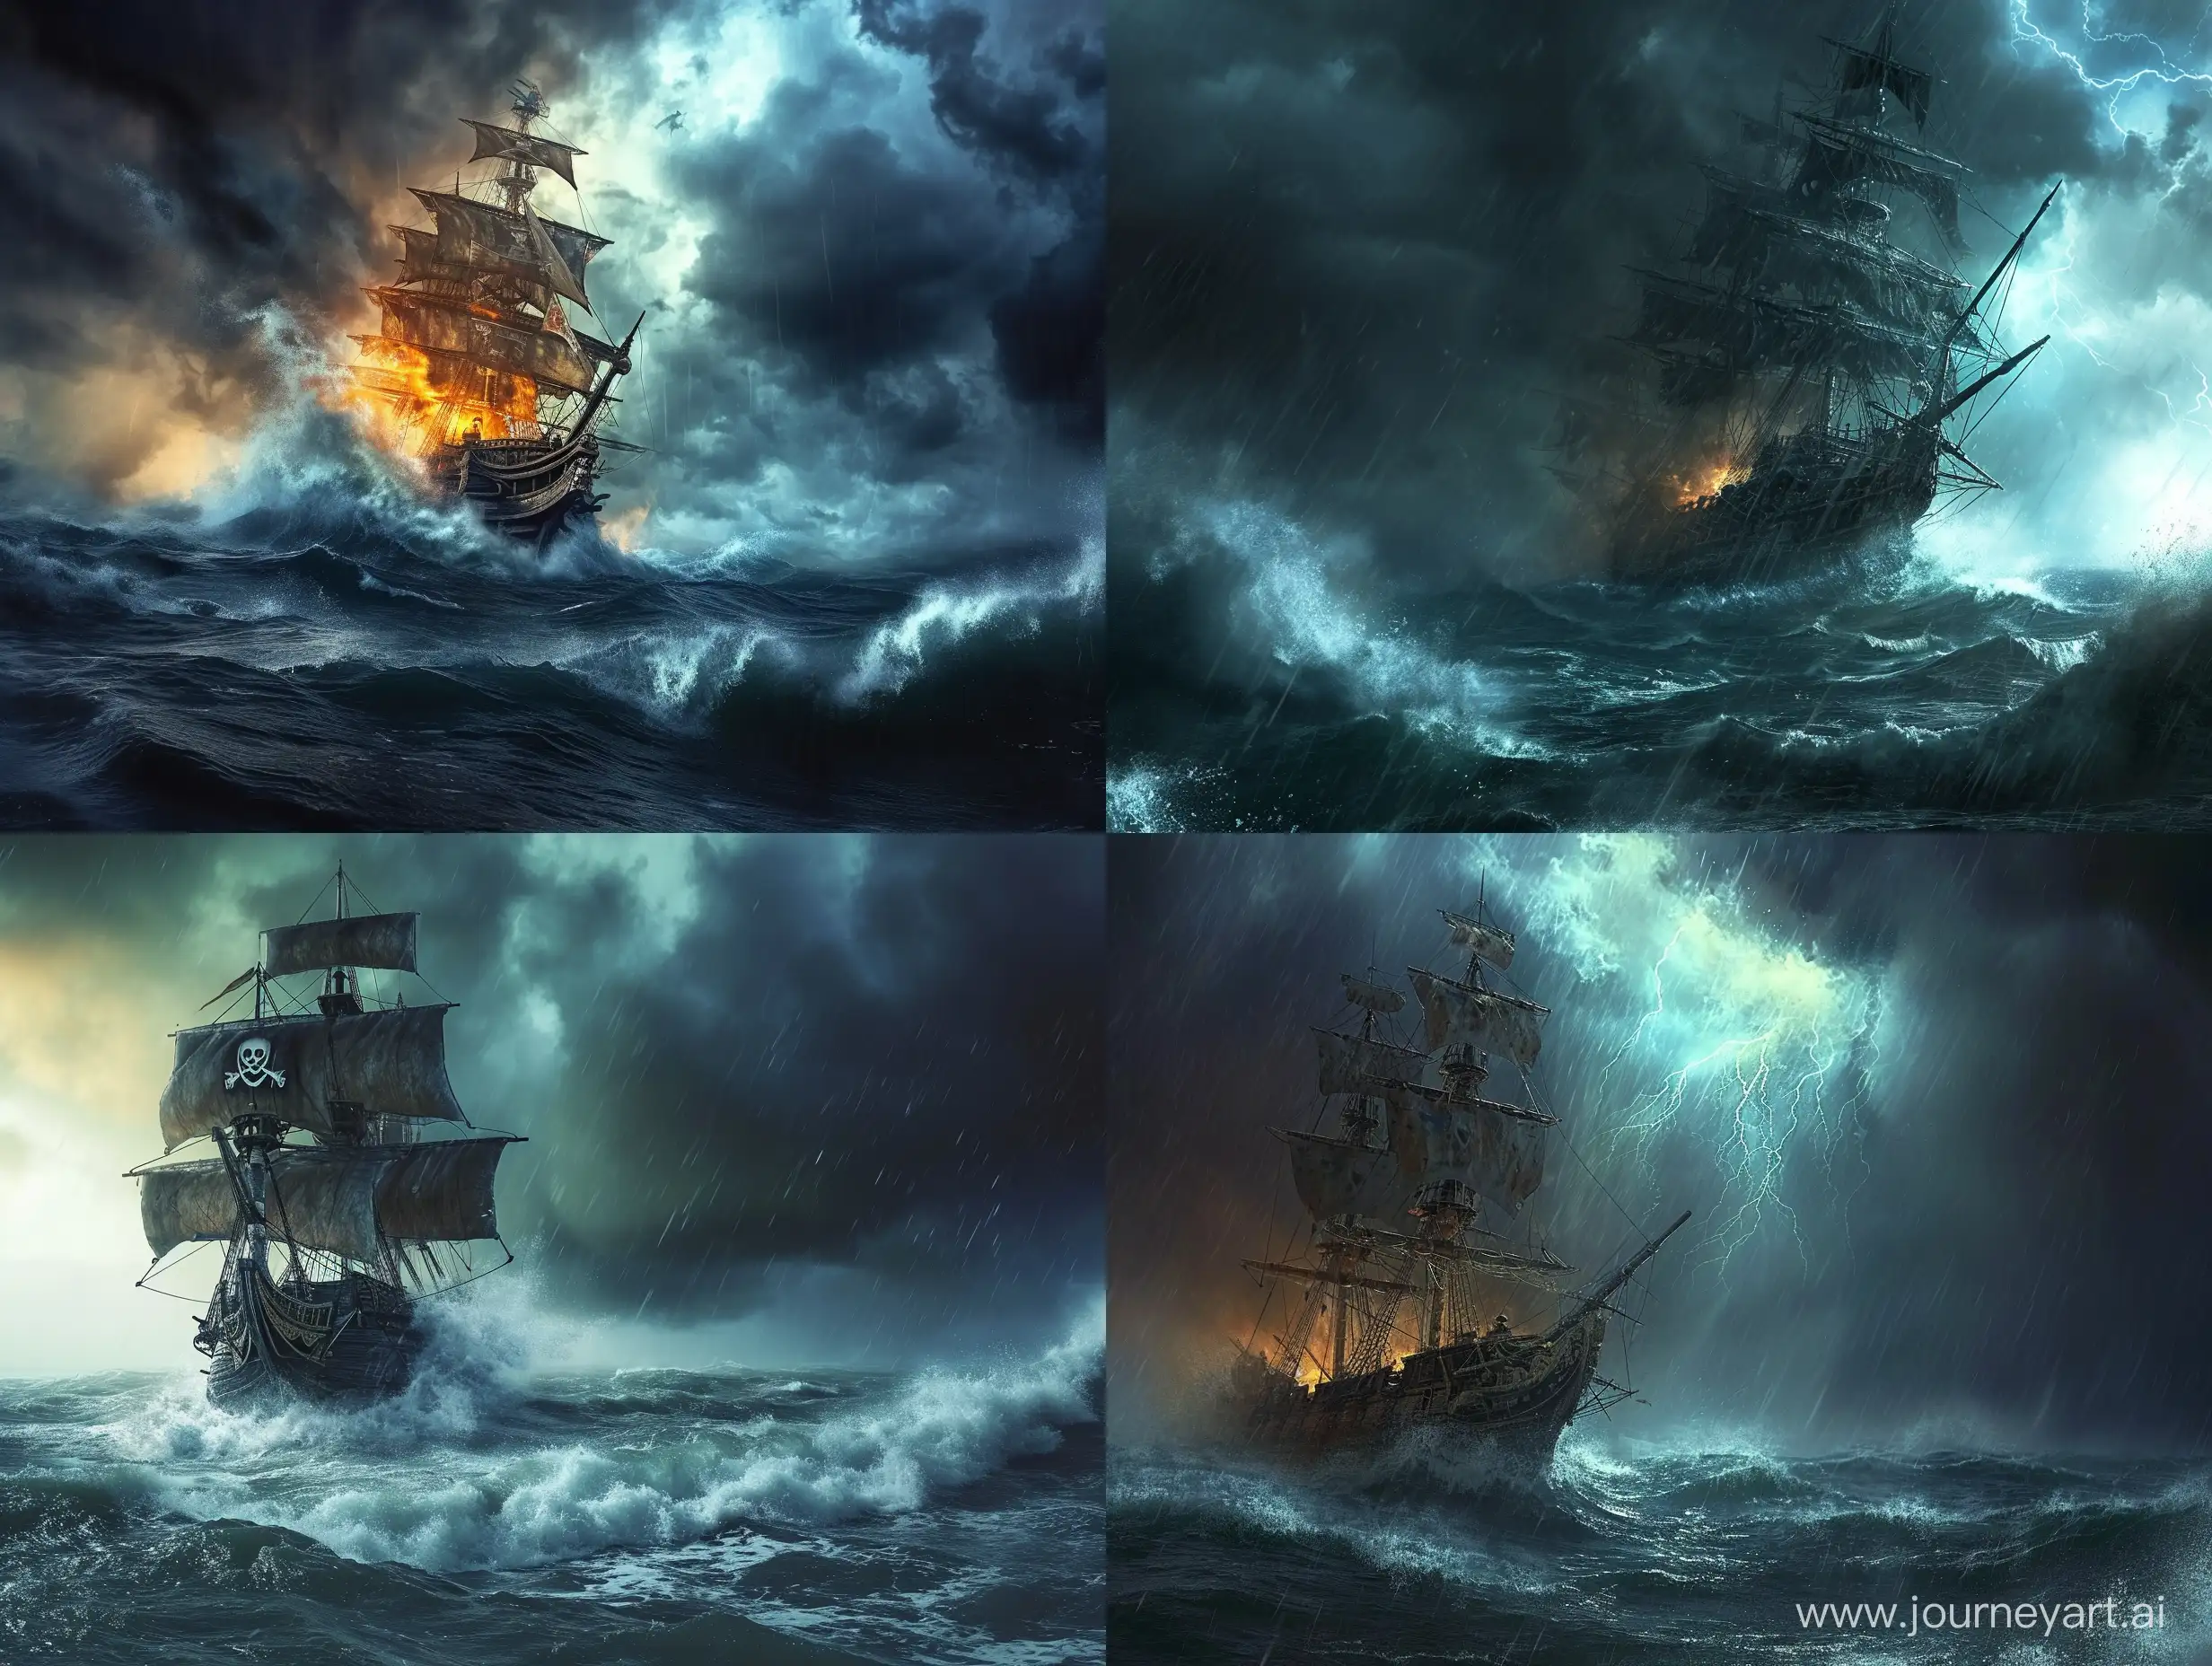 Pirate-Ship-Battling-the-Elements-in-a-Stormy-Sea